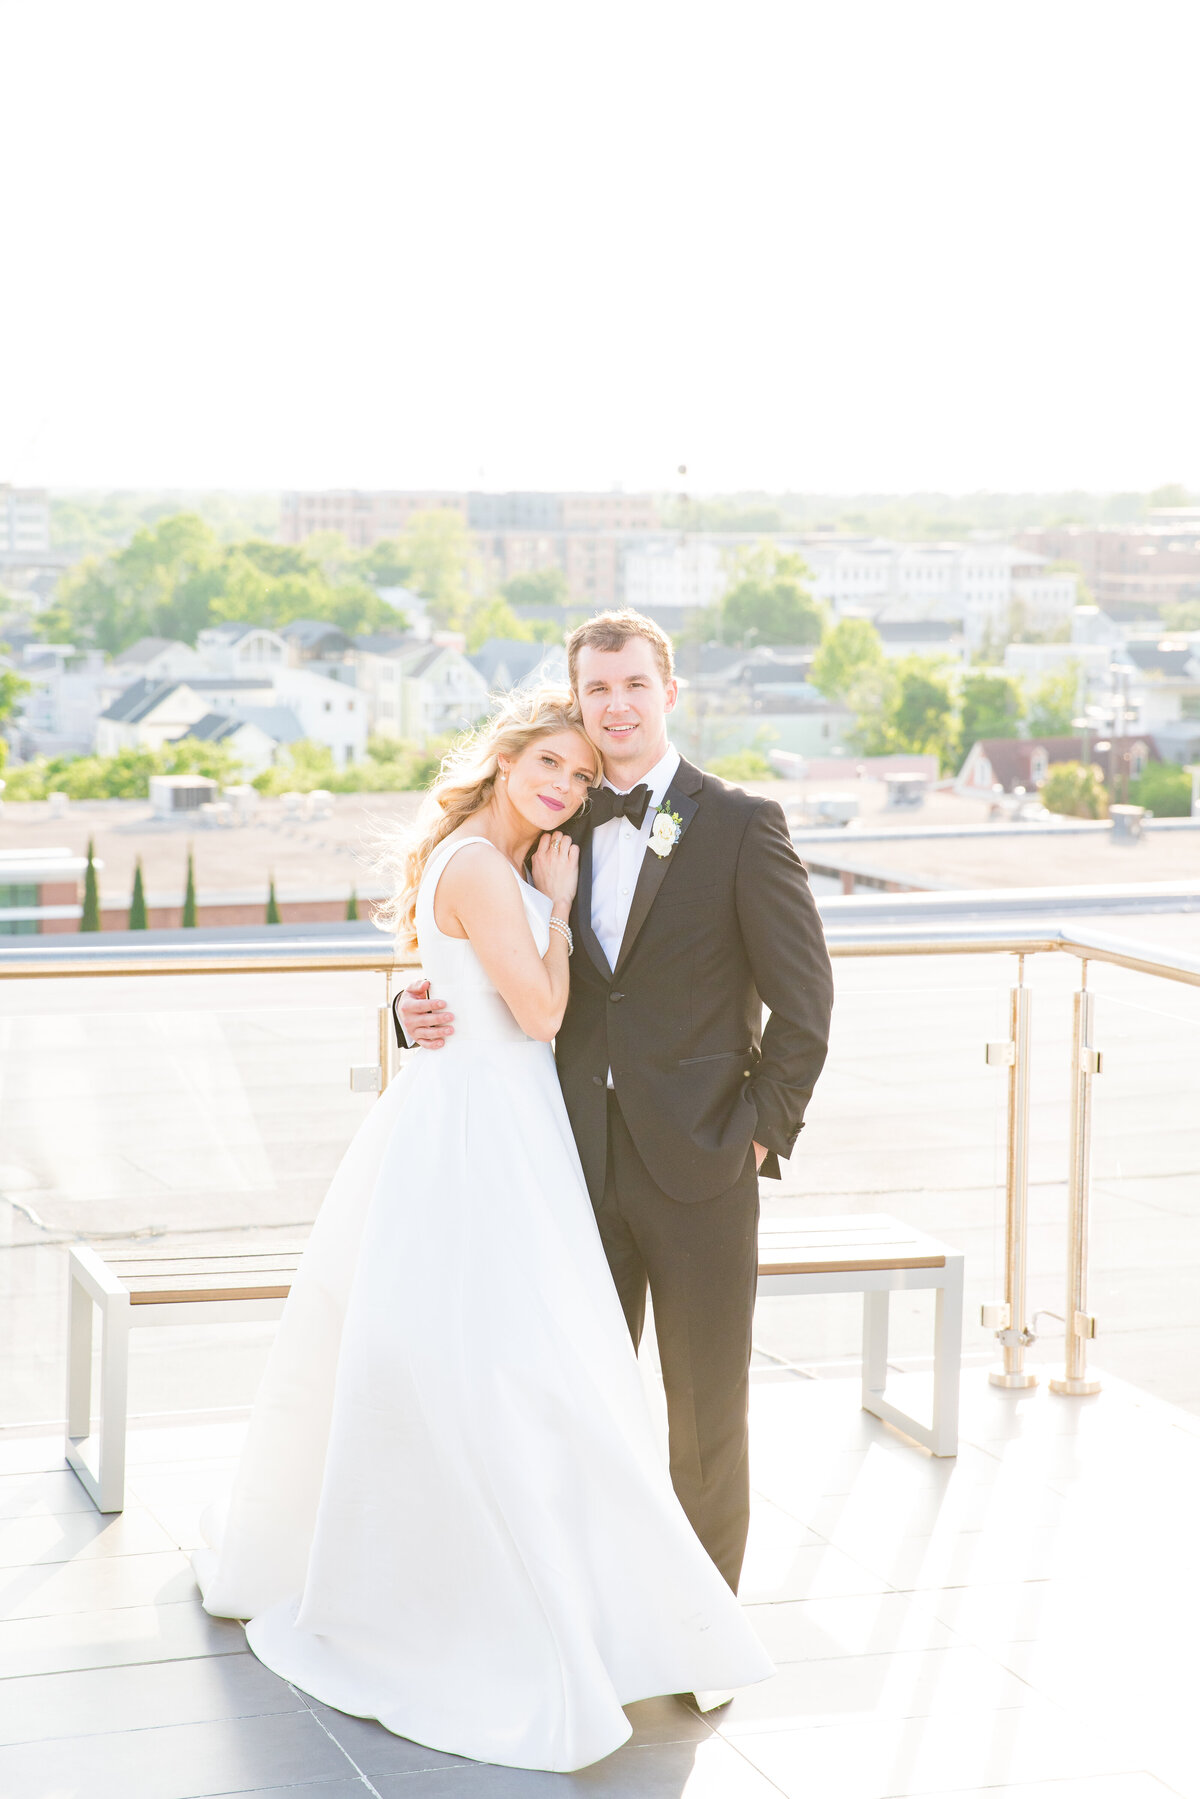 Rooftop portrait of the bride and groom on their wedding day by Charleston, SC wedding photographer Dana Cubbage.